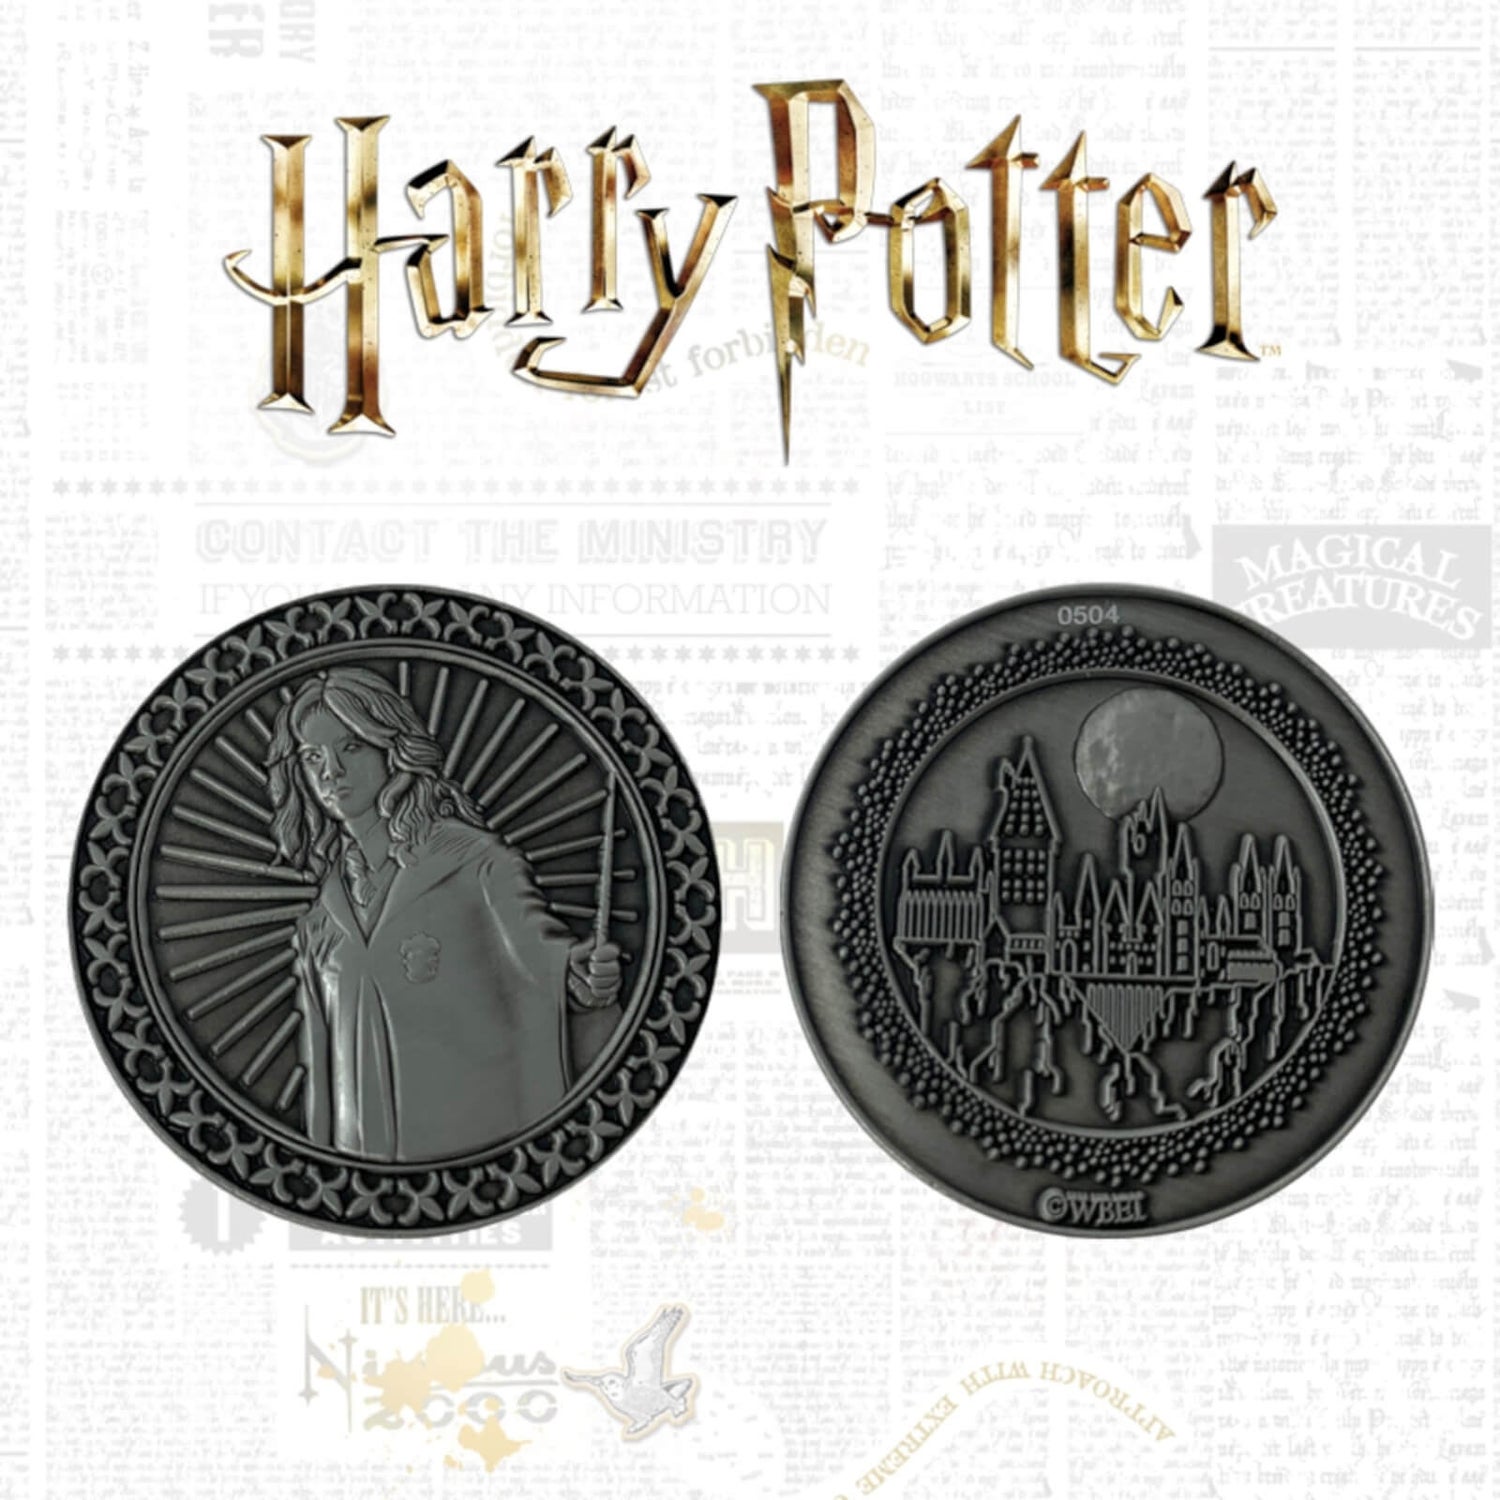 Harry Potter Limited Edition Collectible Coin - Hermione